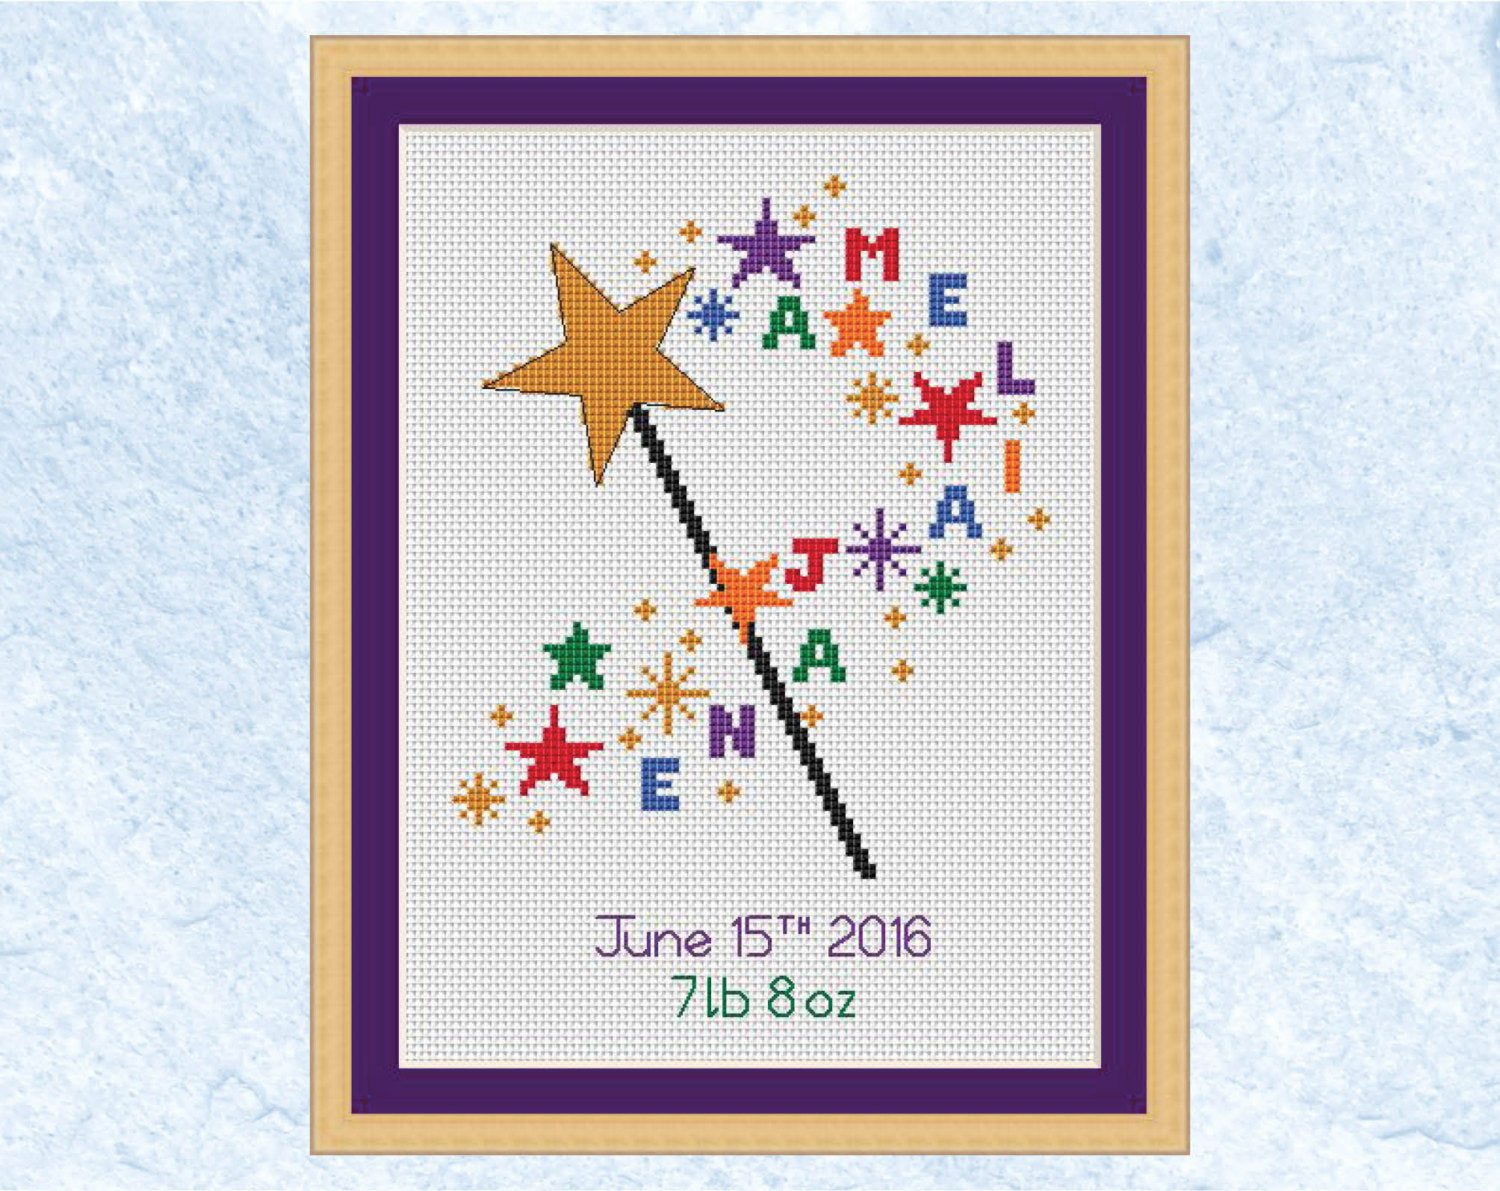 Custom cross stitch pattern of a magic wand spelling out the child's name in colourful letters. The pattern will feature the name(s) and birth details of your choice (or no birth details if preferred). Shown with frame.